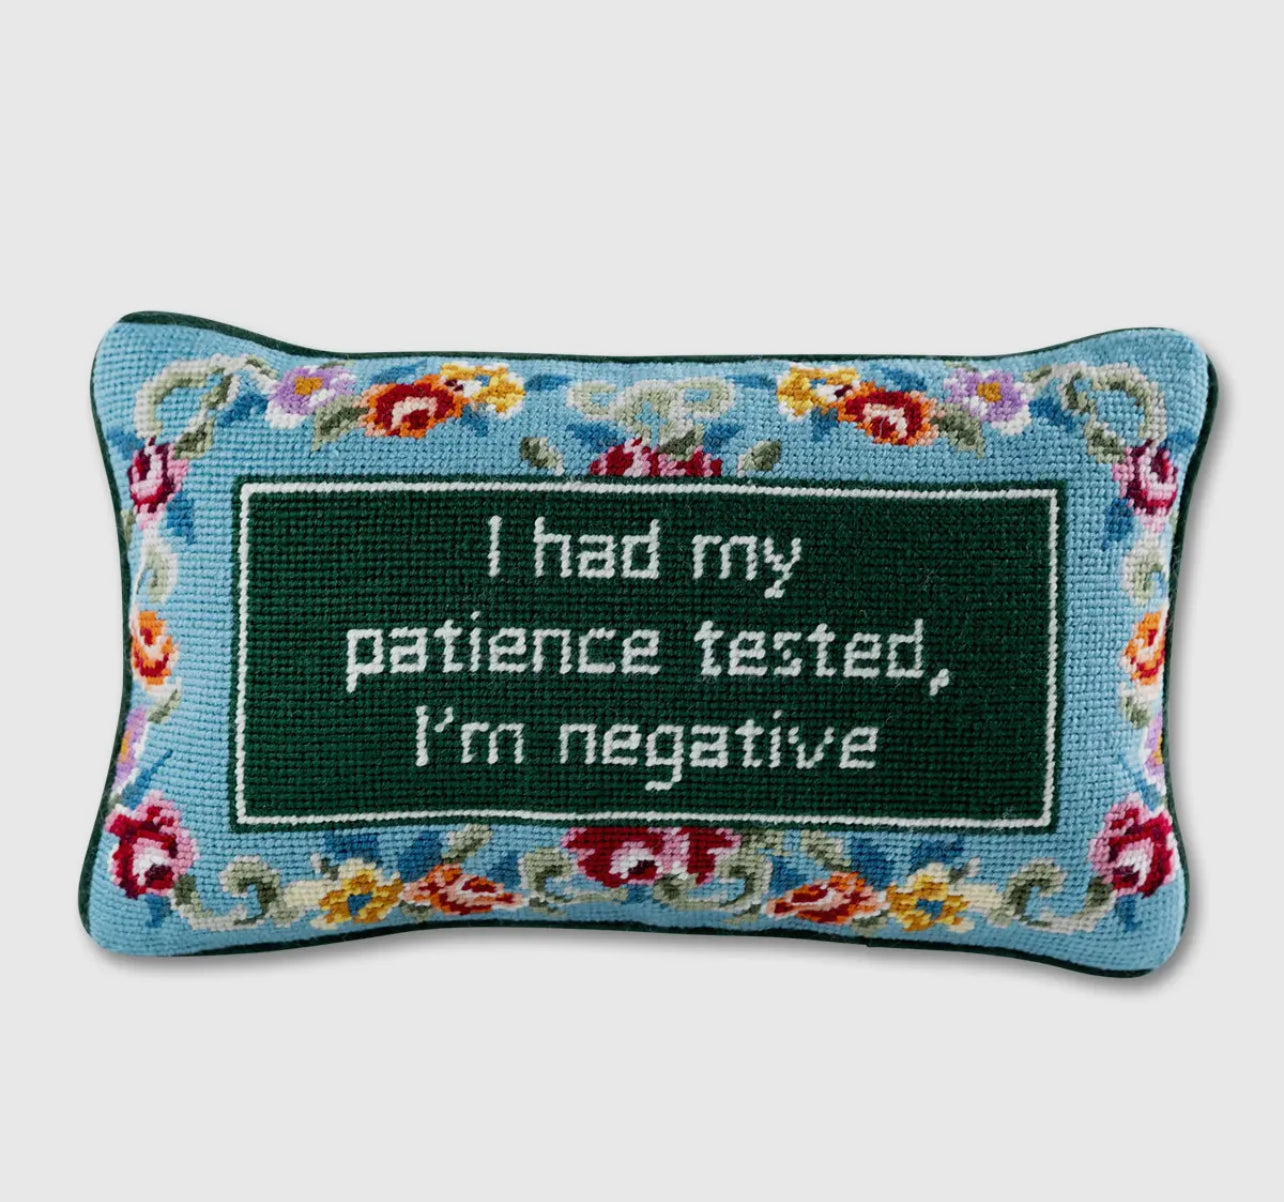 Needlepoint Occasional Pillow